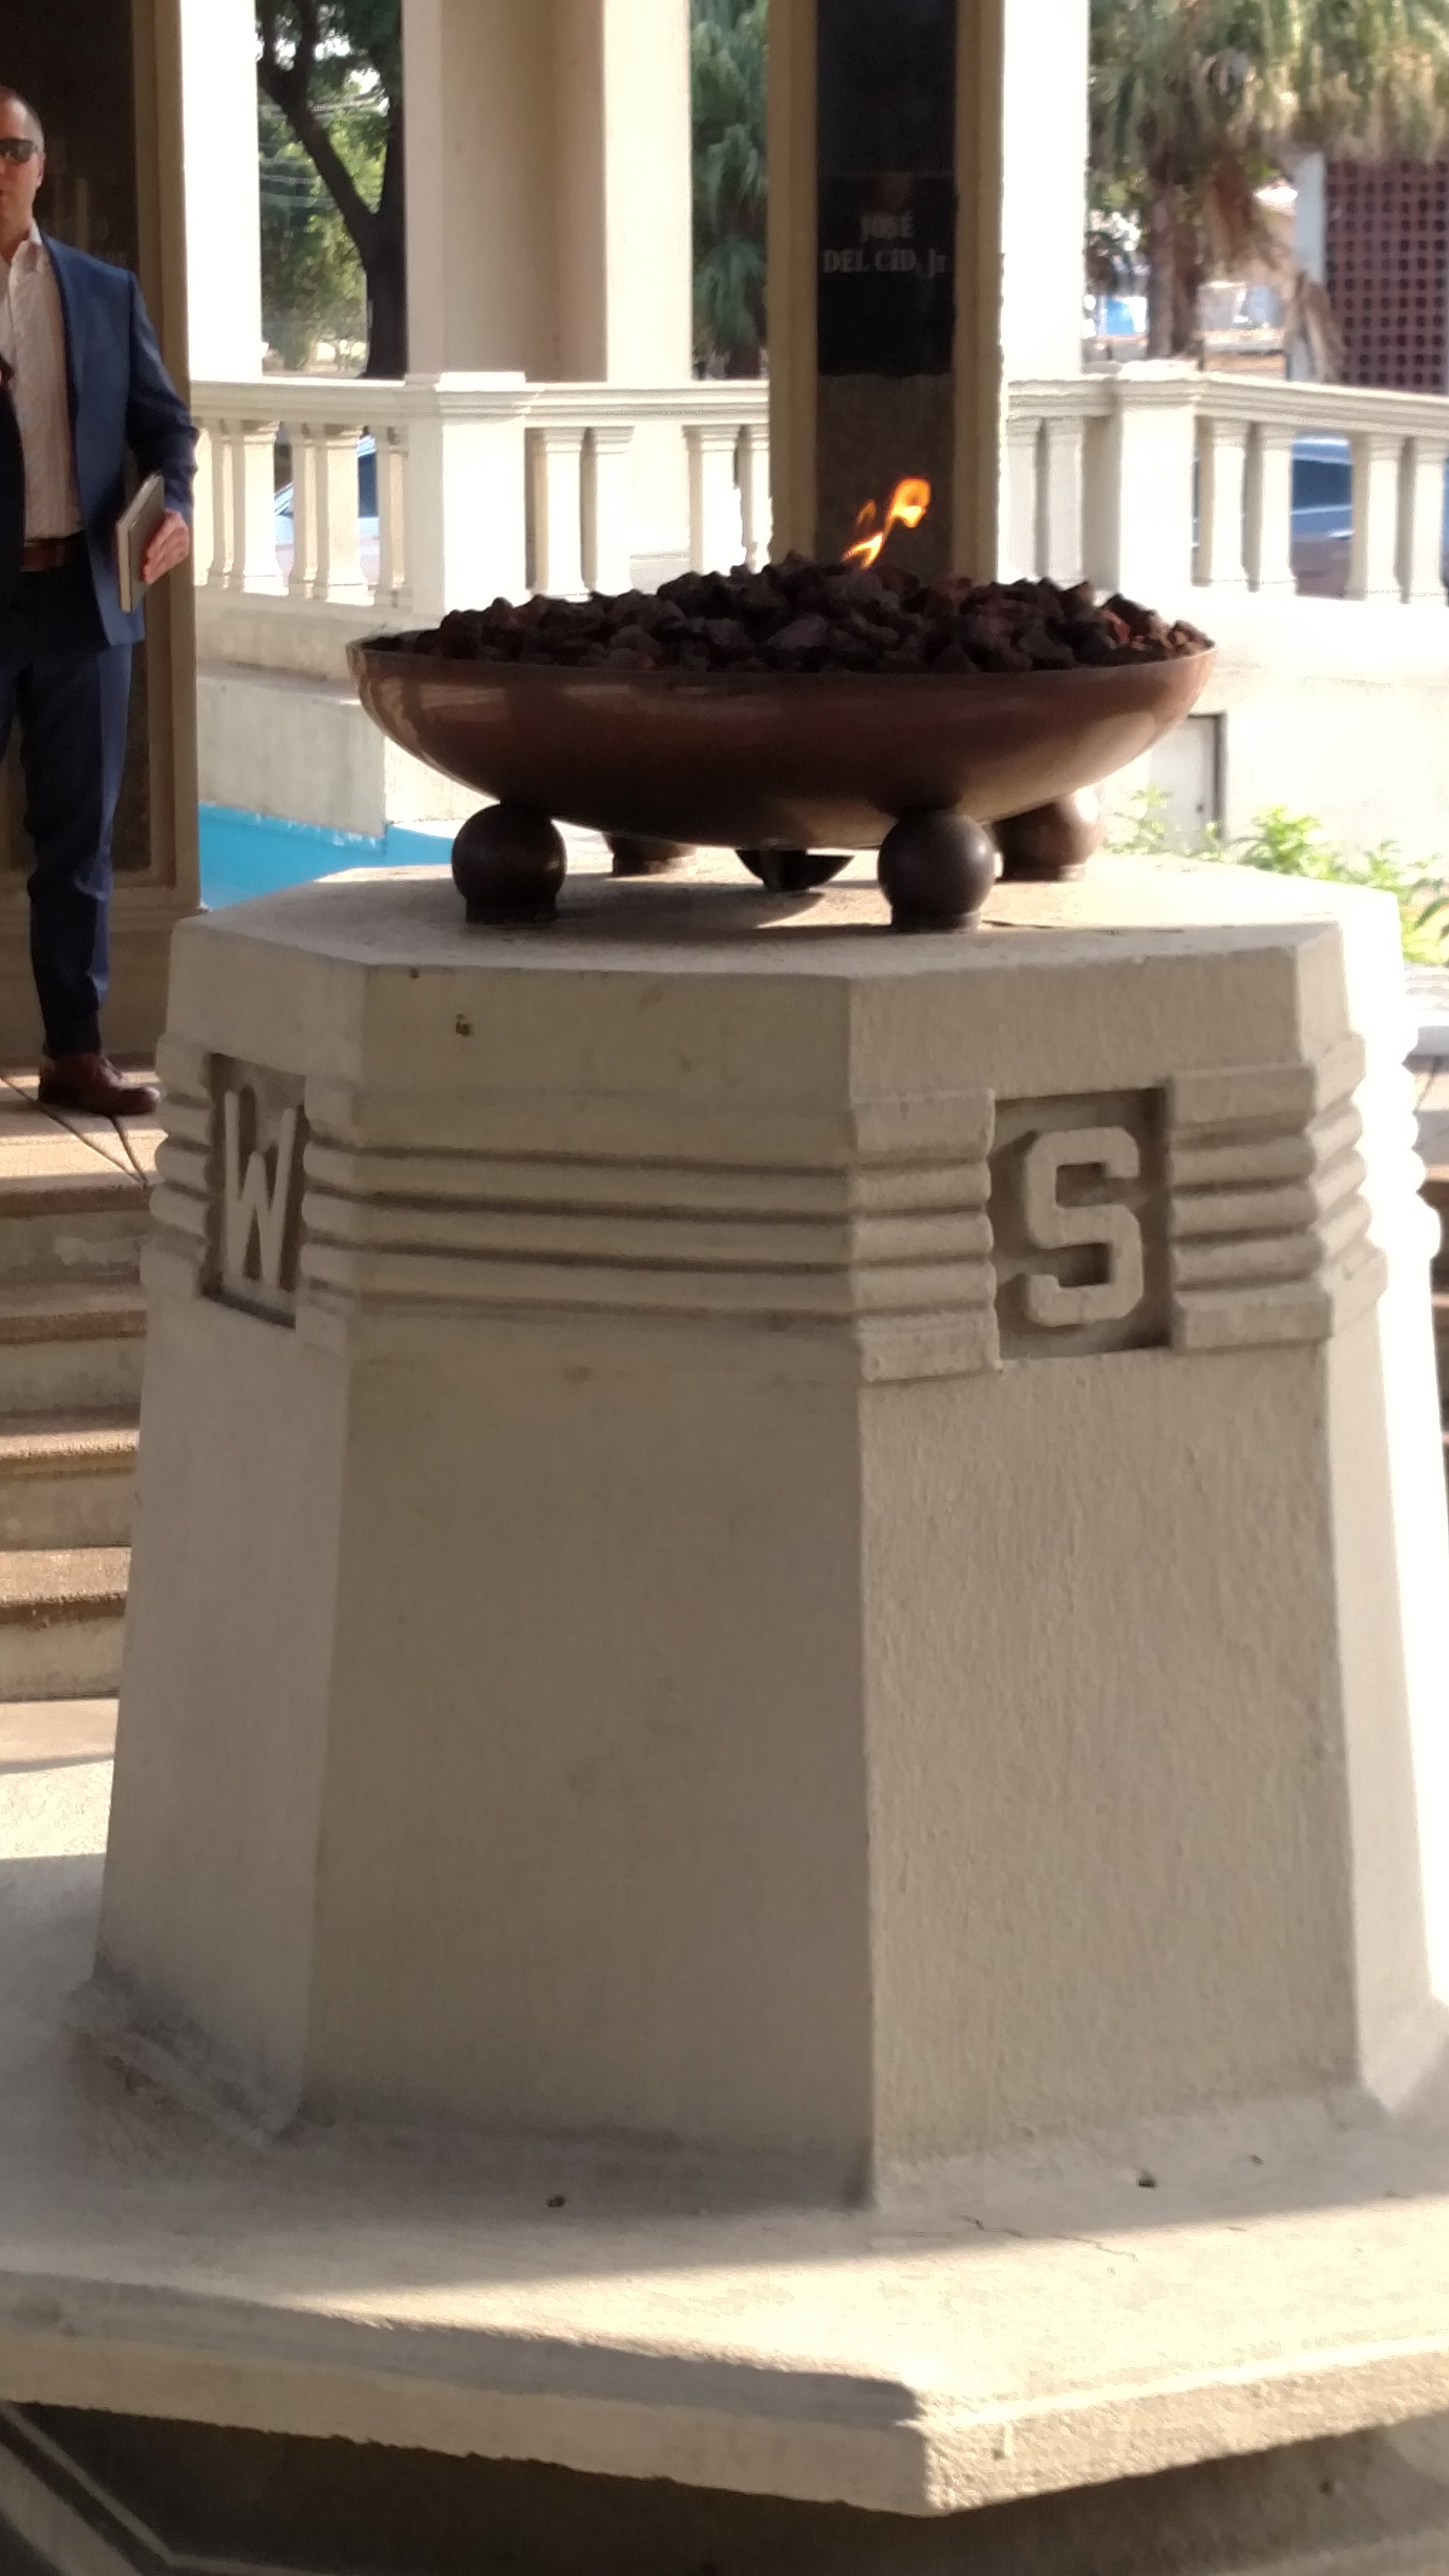 The eternal flame that rests at the former Balboa High School in Panama.